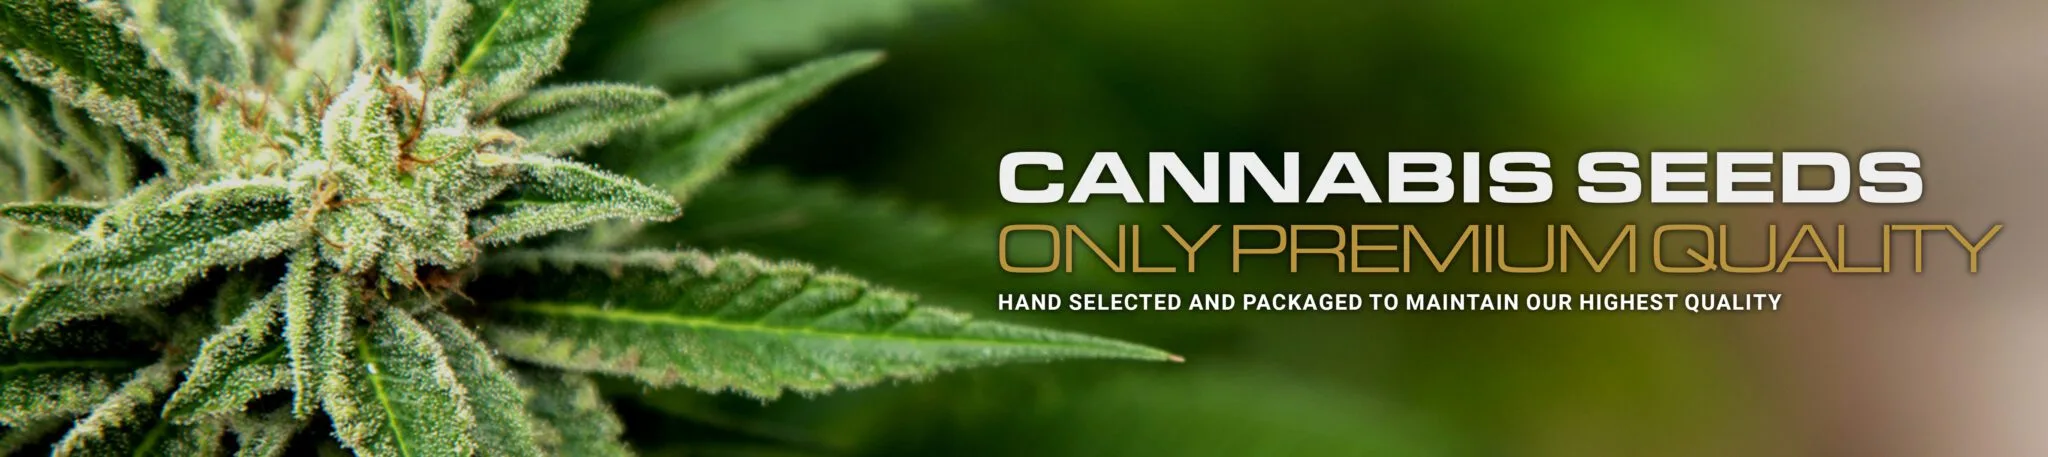 Cannabis seeds only premium quality